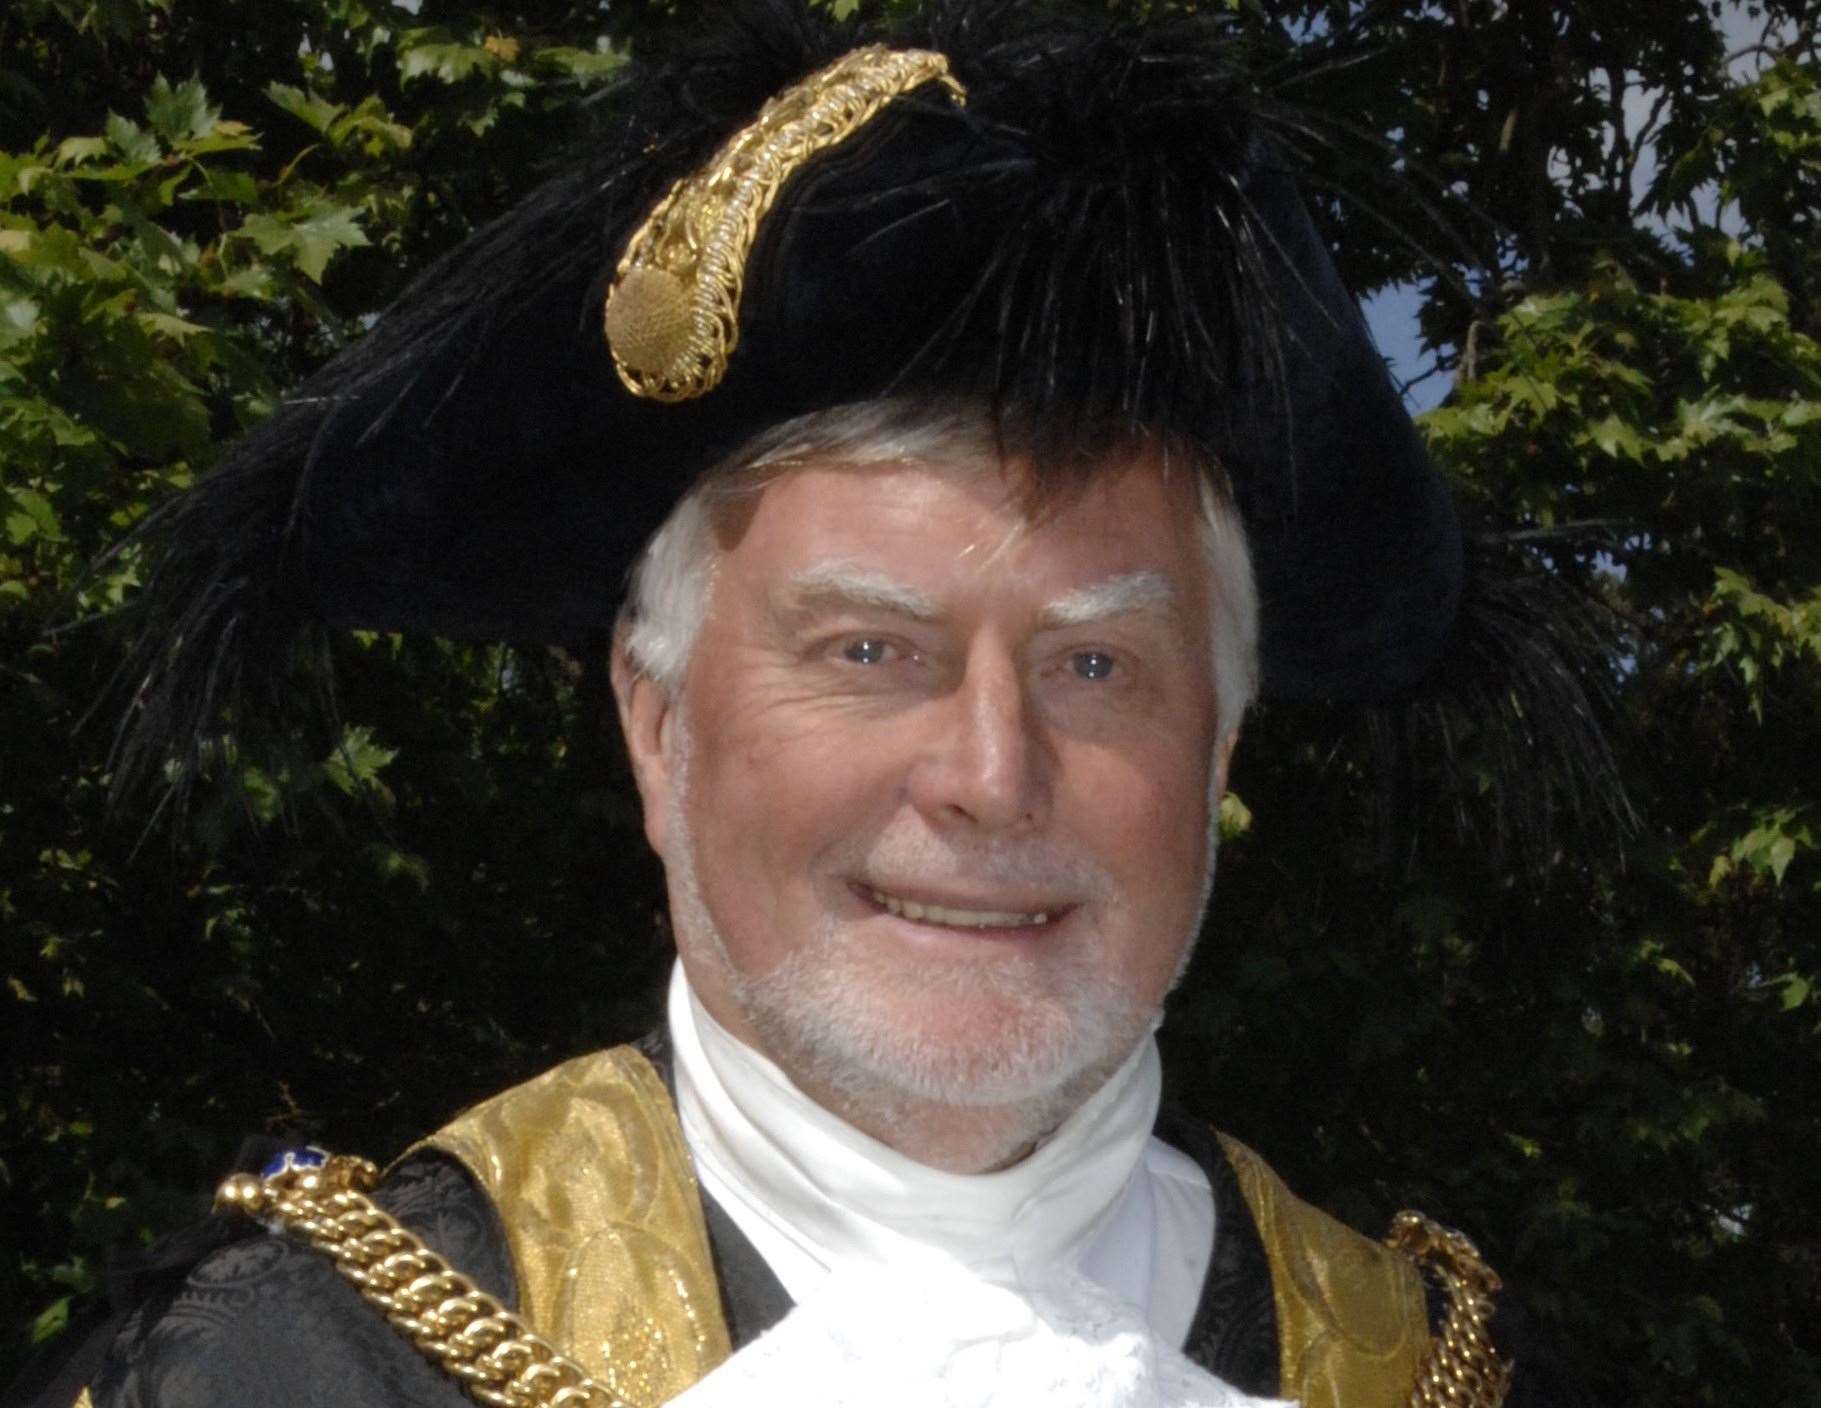 Former Lord Mayor of Canterbury, Cllr Ian Thomas, took his own life after being arrested